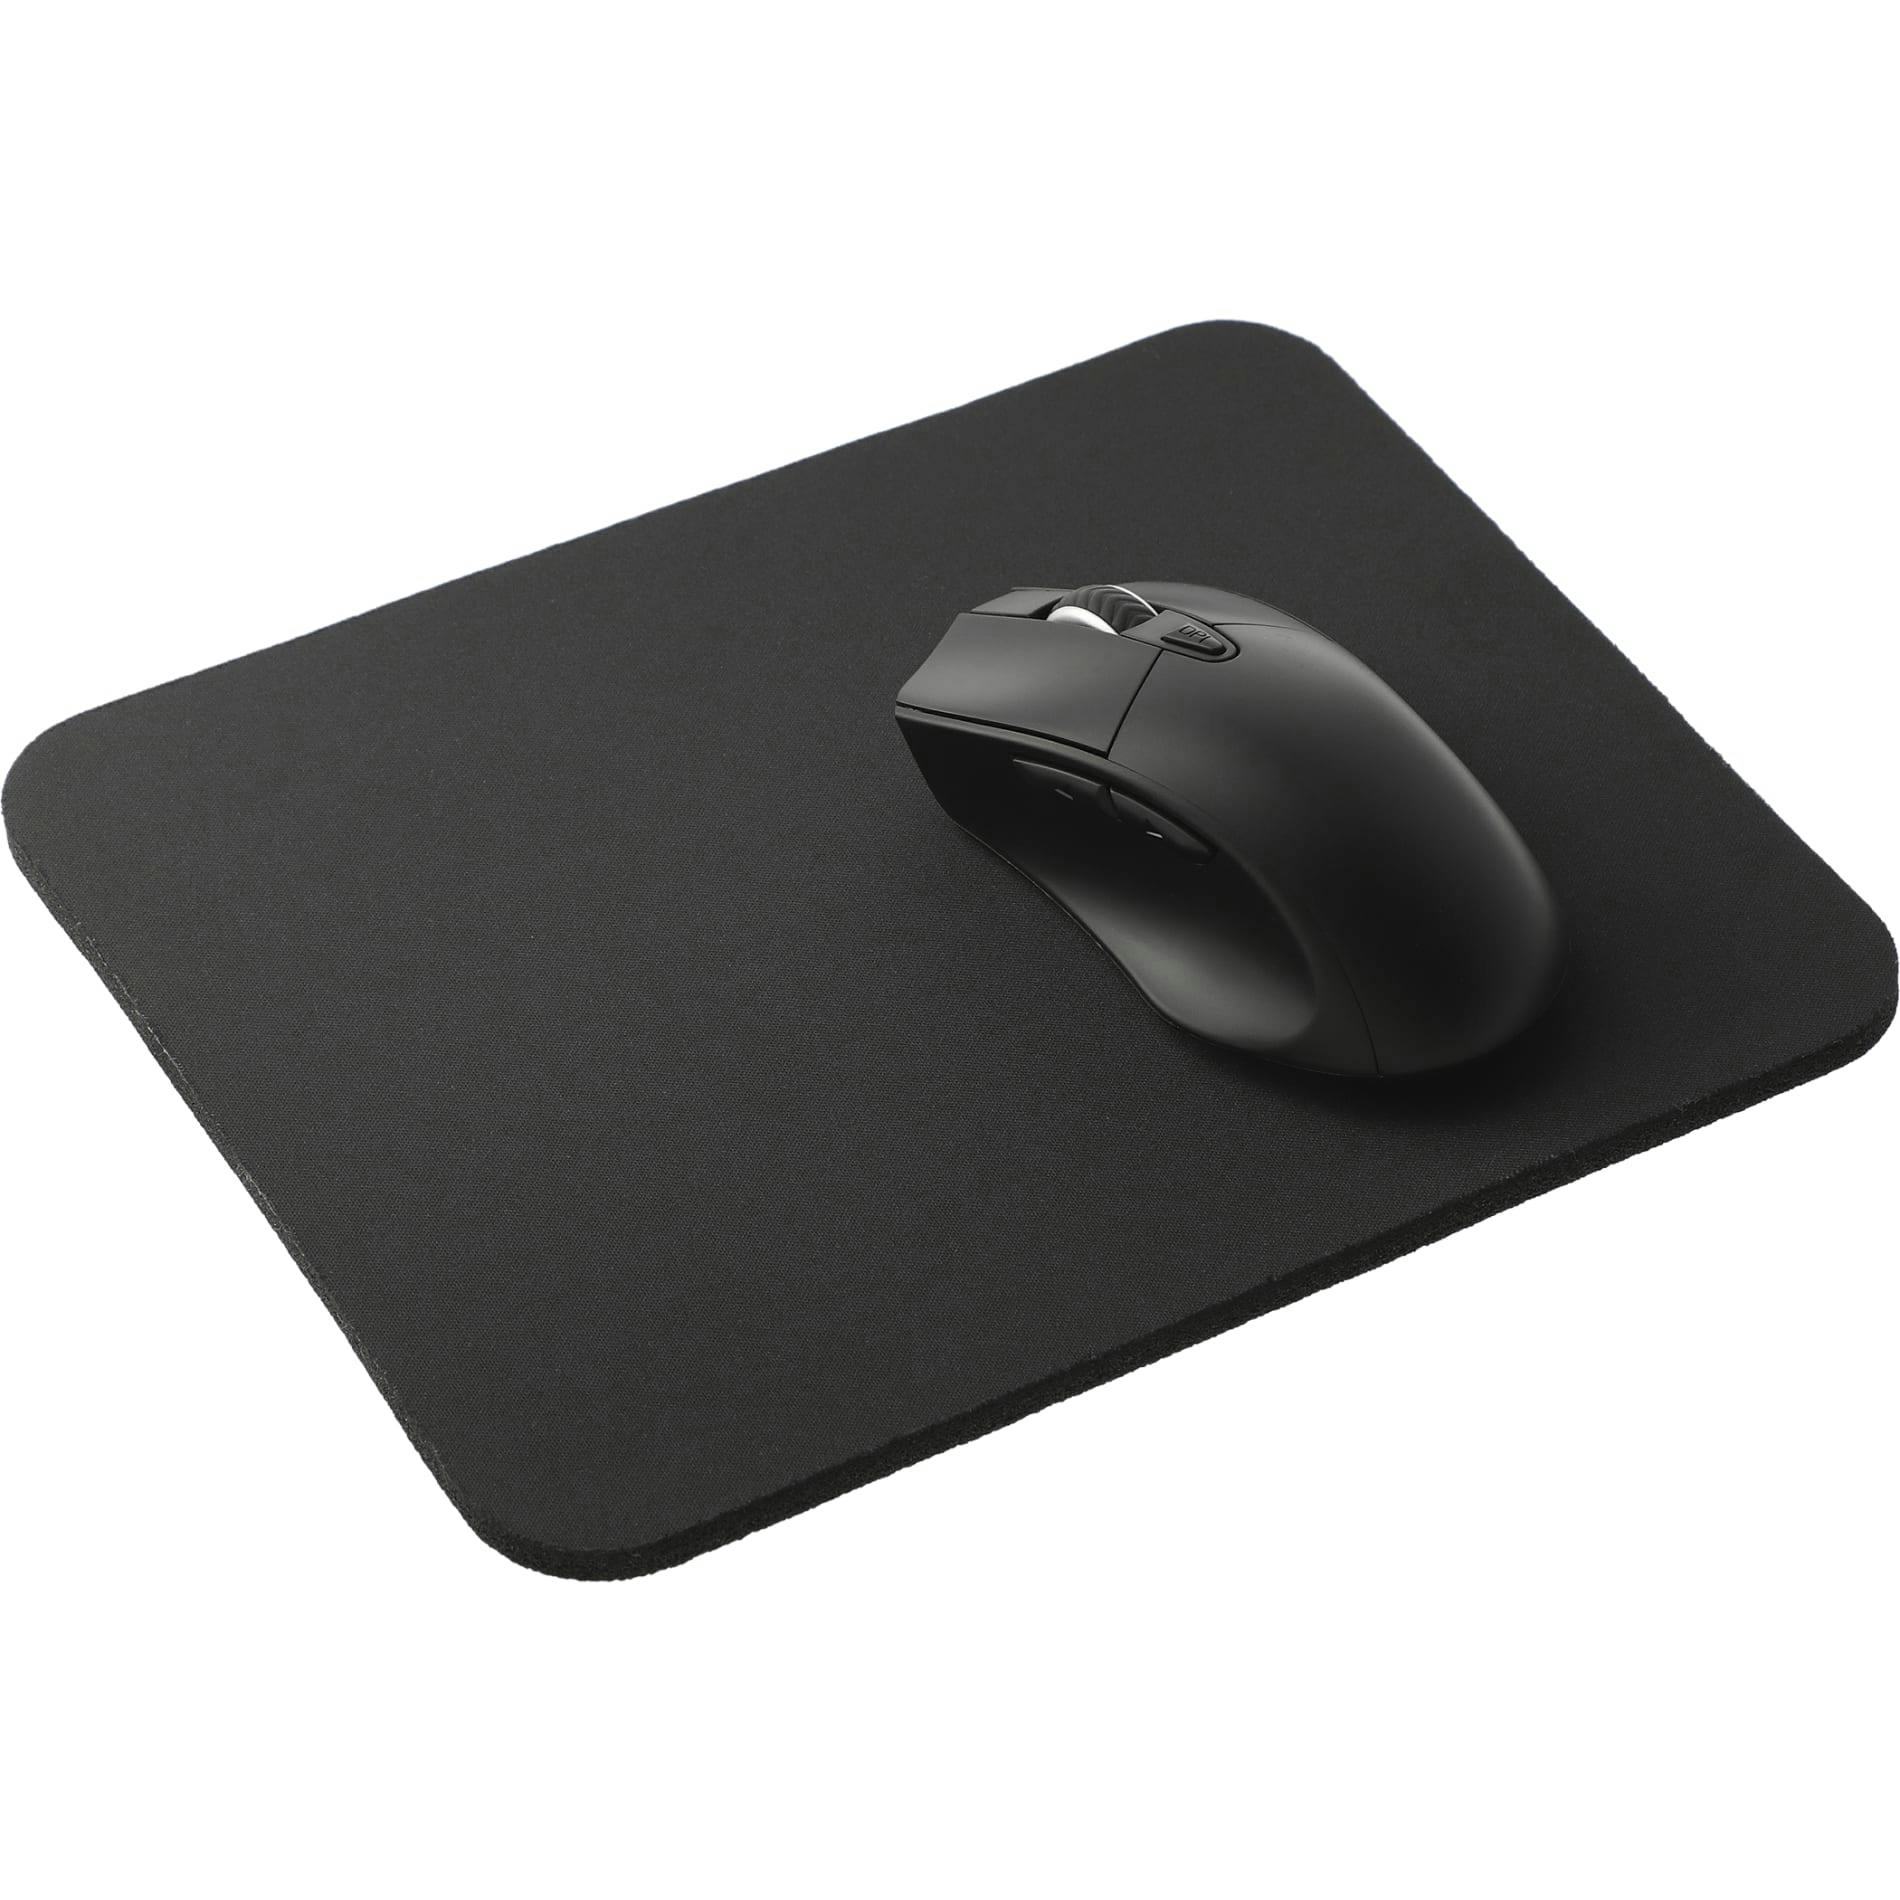 Wizard Wireless Mouse with Coating - additional Image 1